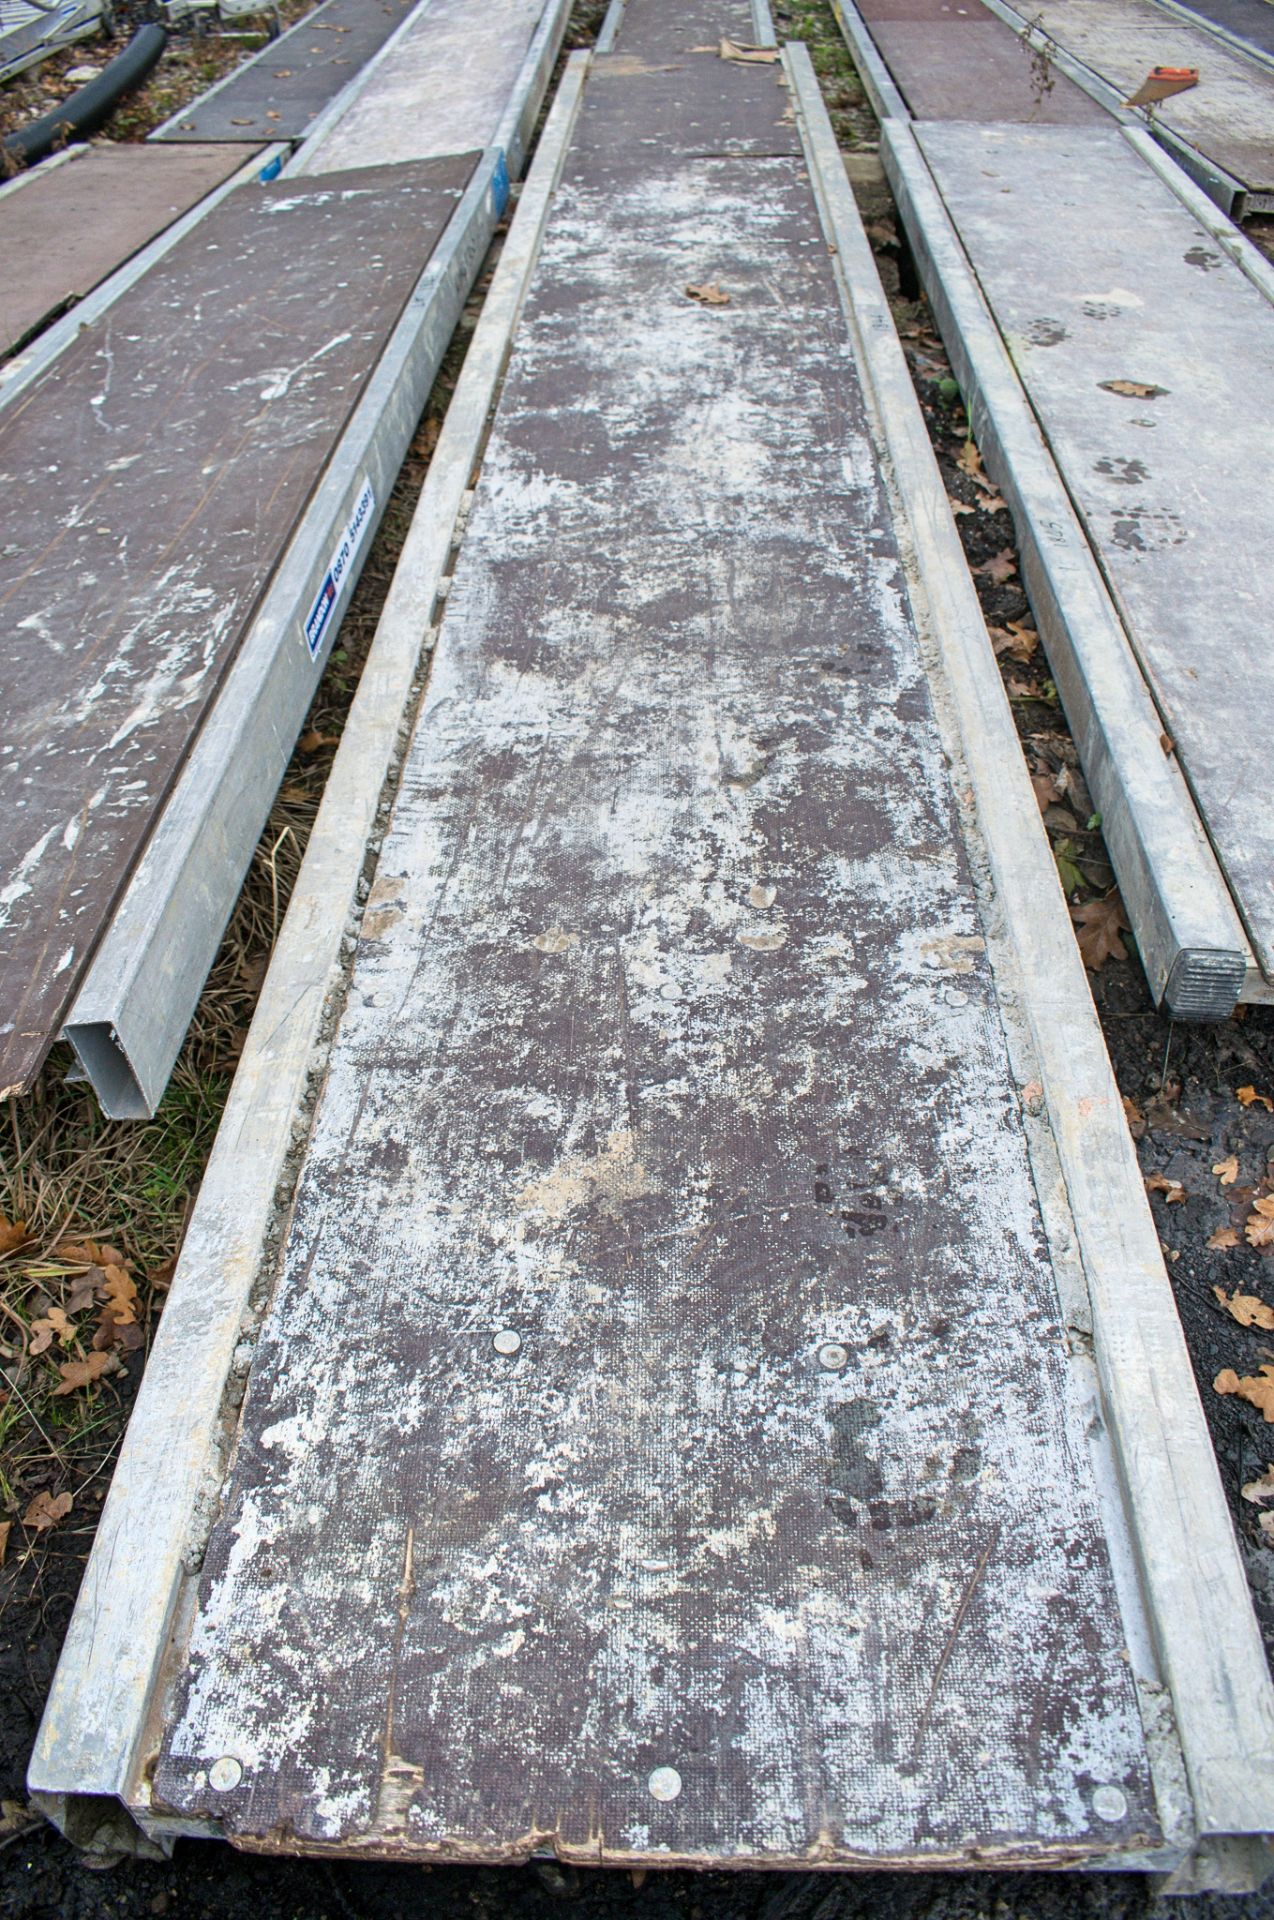 Aluminium staging board approximately 14ft long